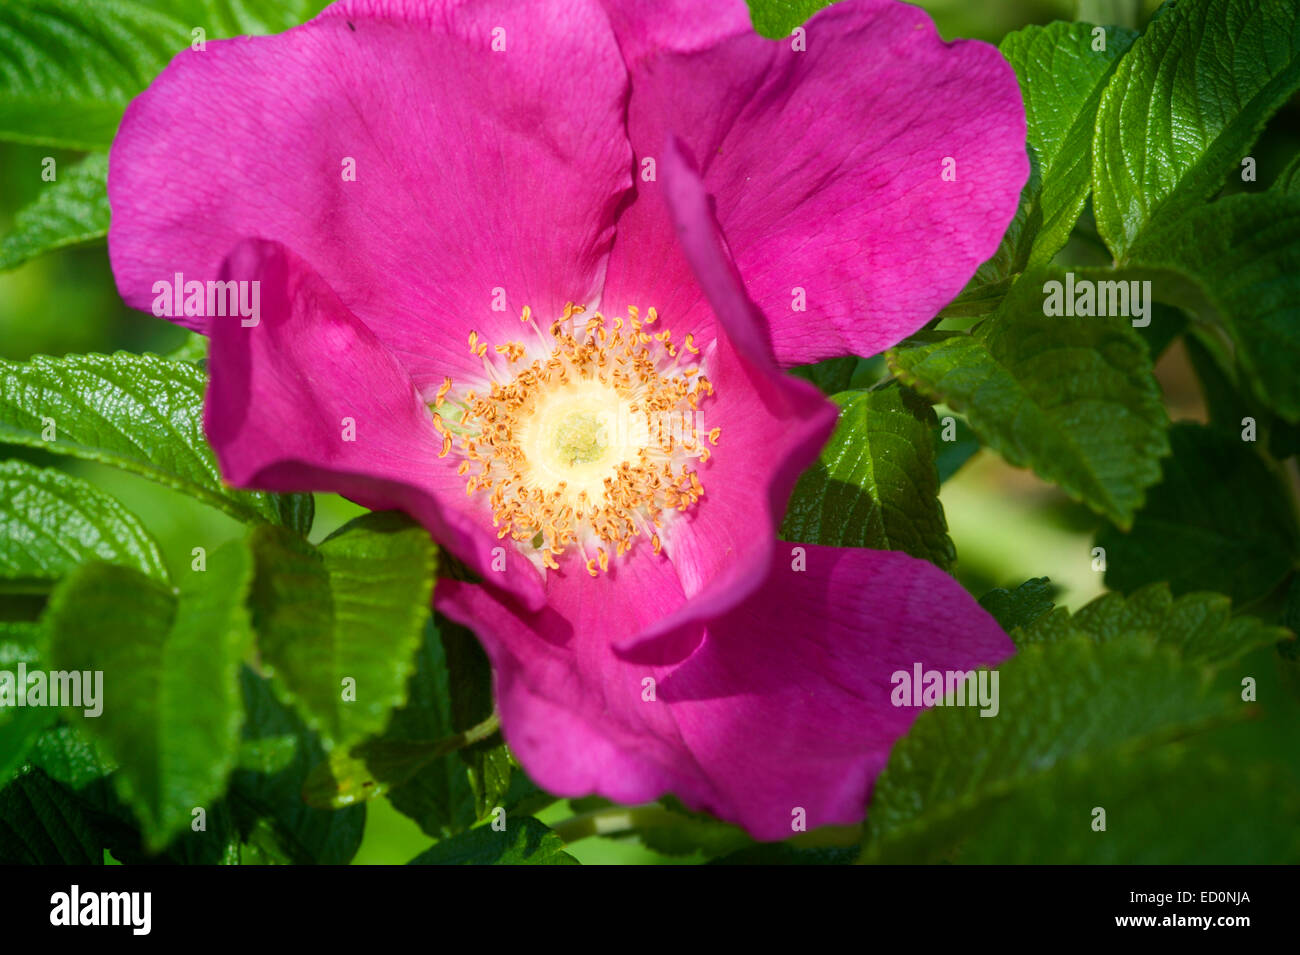 Close up of a single bloom from a hedge rose Rosa rugosa Ramanas Rose in a garden in Scotland within the Cairngorms National Pk Stock Photo